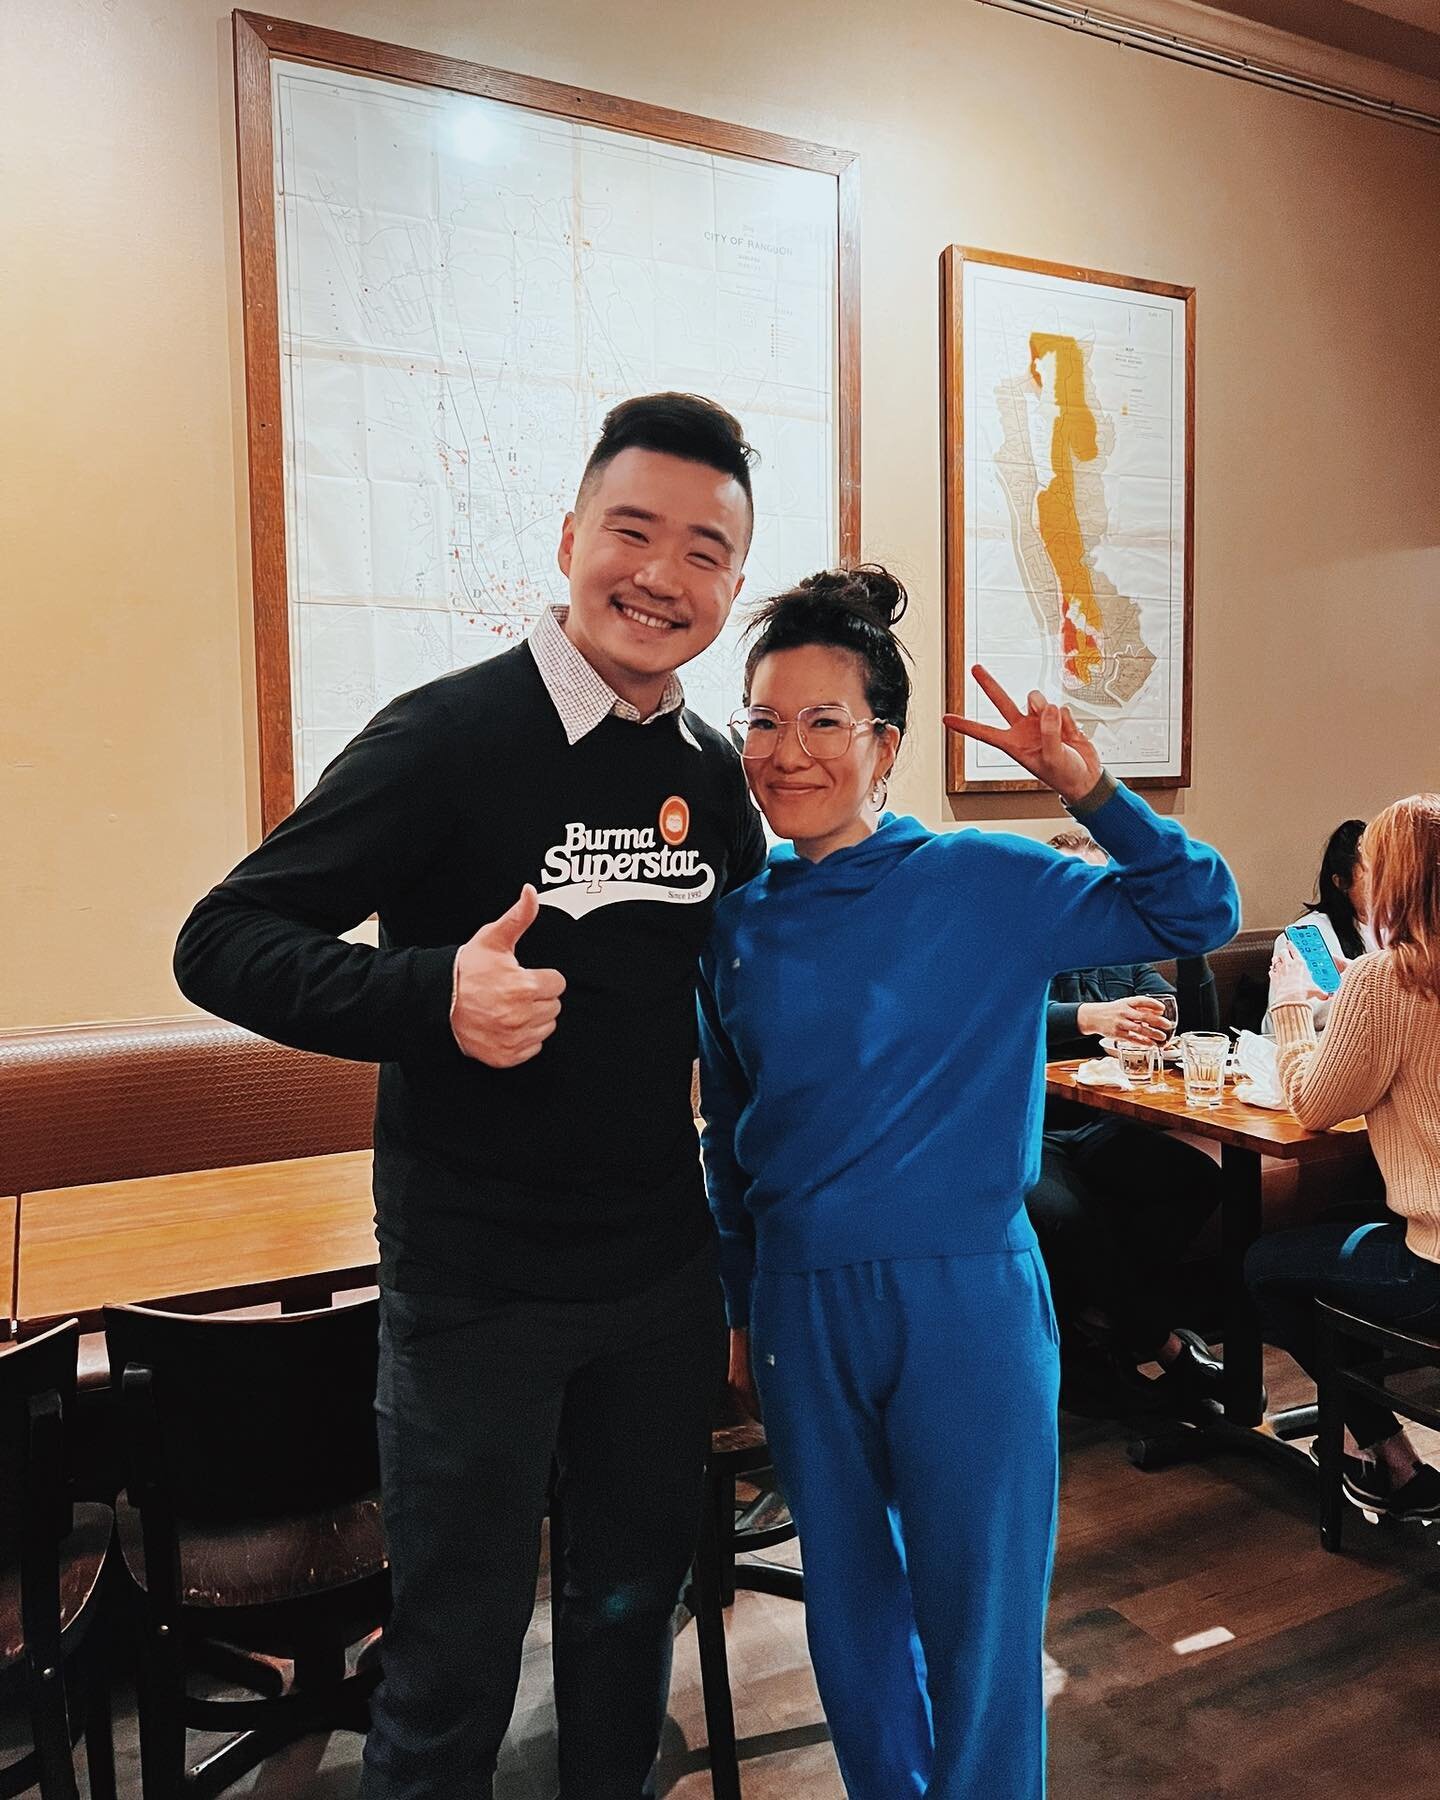 Ali Wong came and dine with us! What a Wonderful Christmas present for the Burma Superstar 🤎💛
.
.
.
.
.
.
.
#burmasuperstar #aliwong #babycobra #aliwongbabycobra #alwaysbemymaybe #burmesefood #myammar #sanfranciscorestaurants #sffeedfeed #feedfeed